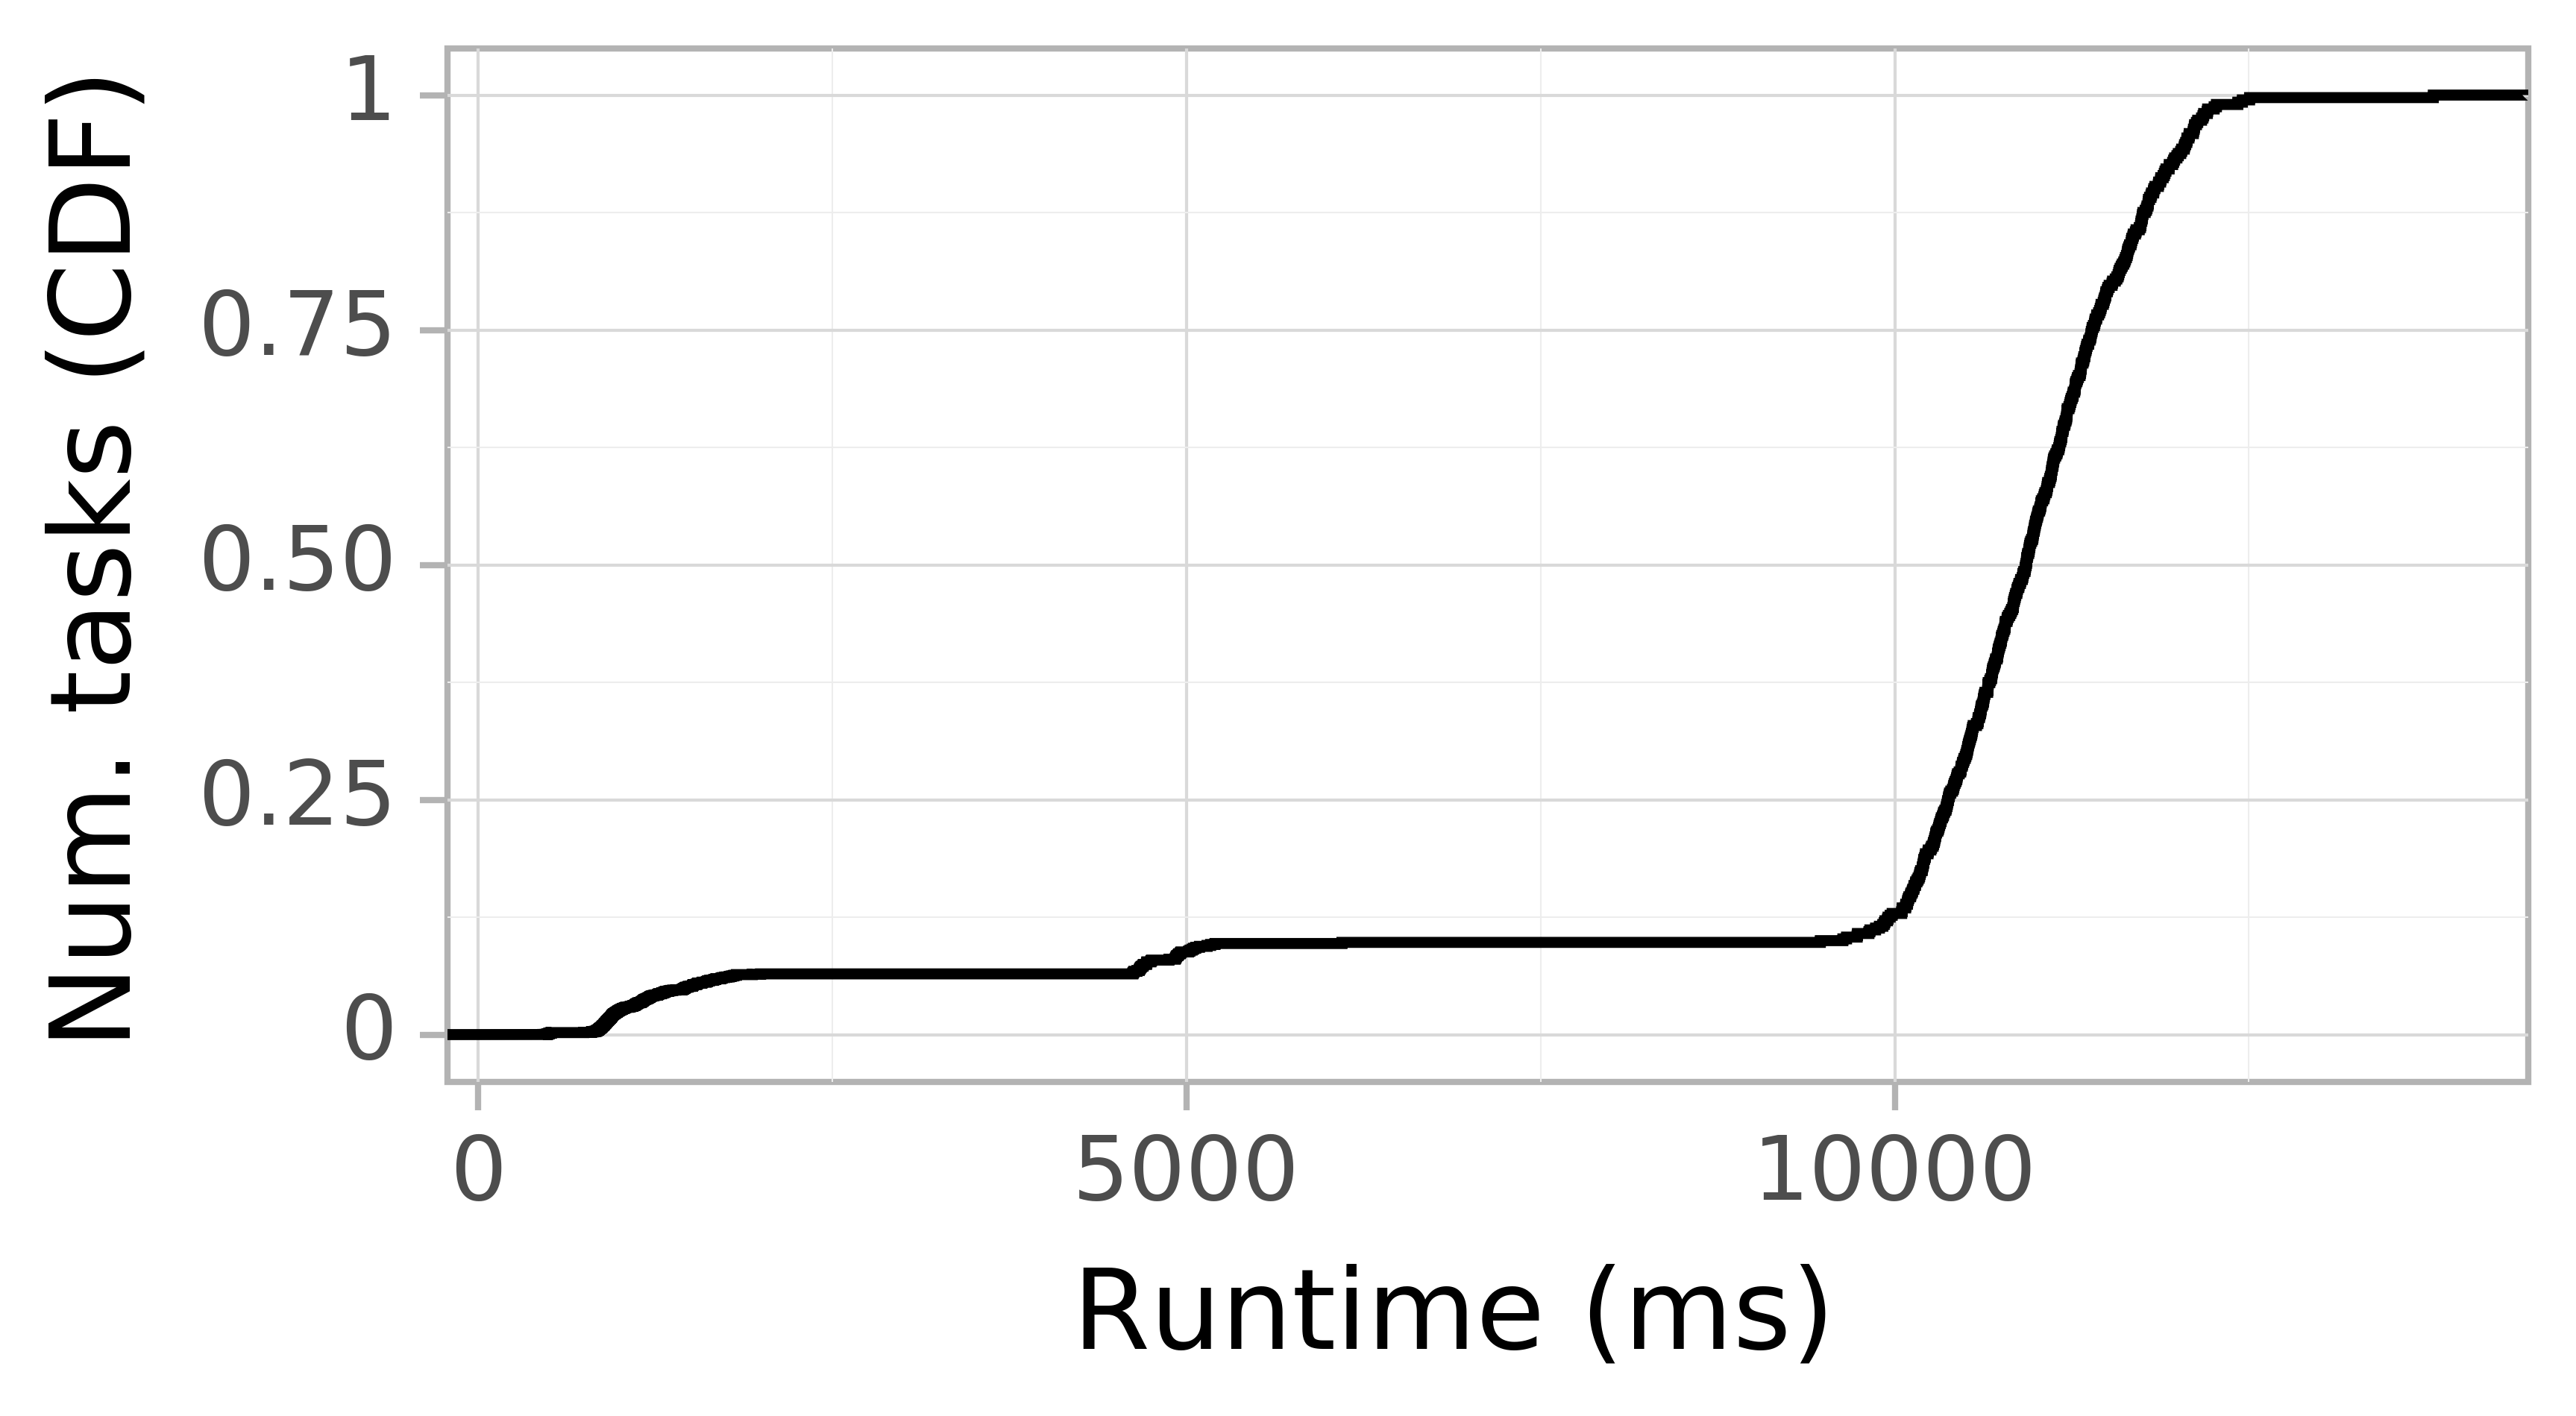 Task runtime CDF graph for the askalon-new_ee38 trace.